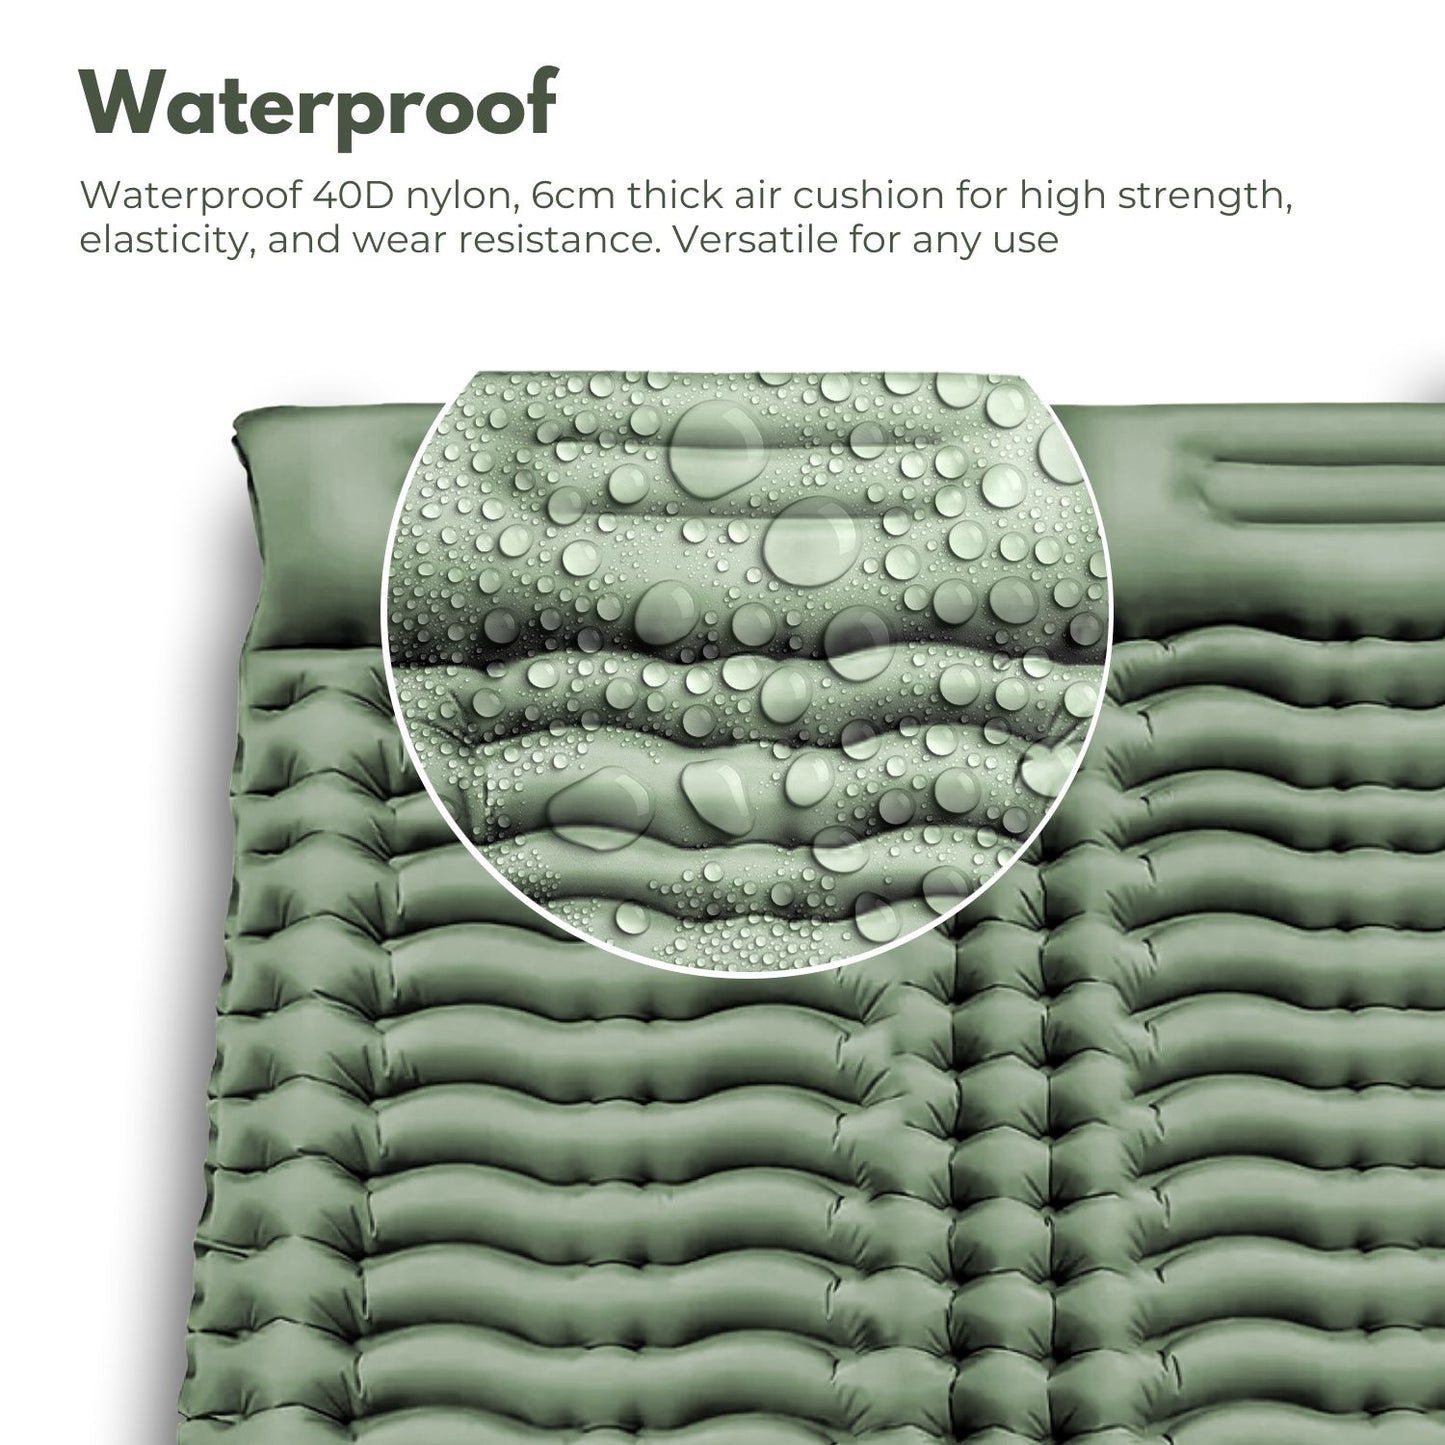 Premium Double Camping Sleeping Pad with Integrated Pillow in Army Green